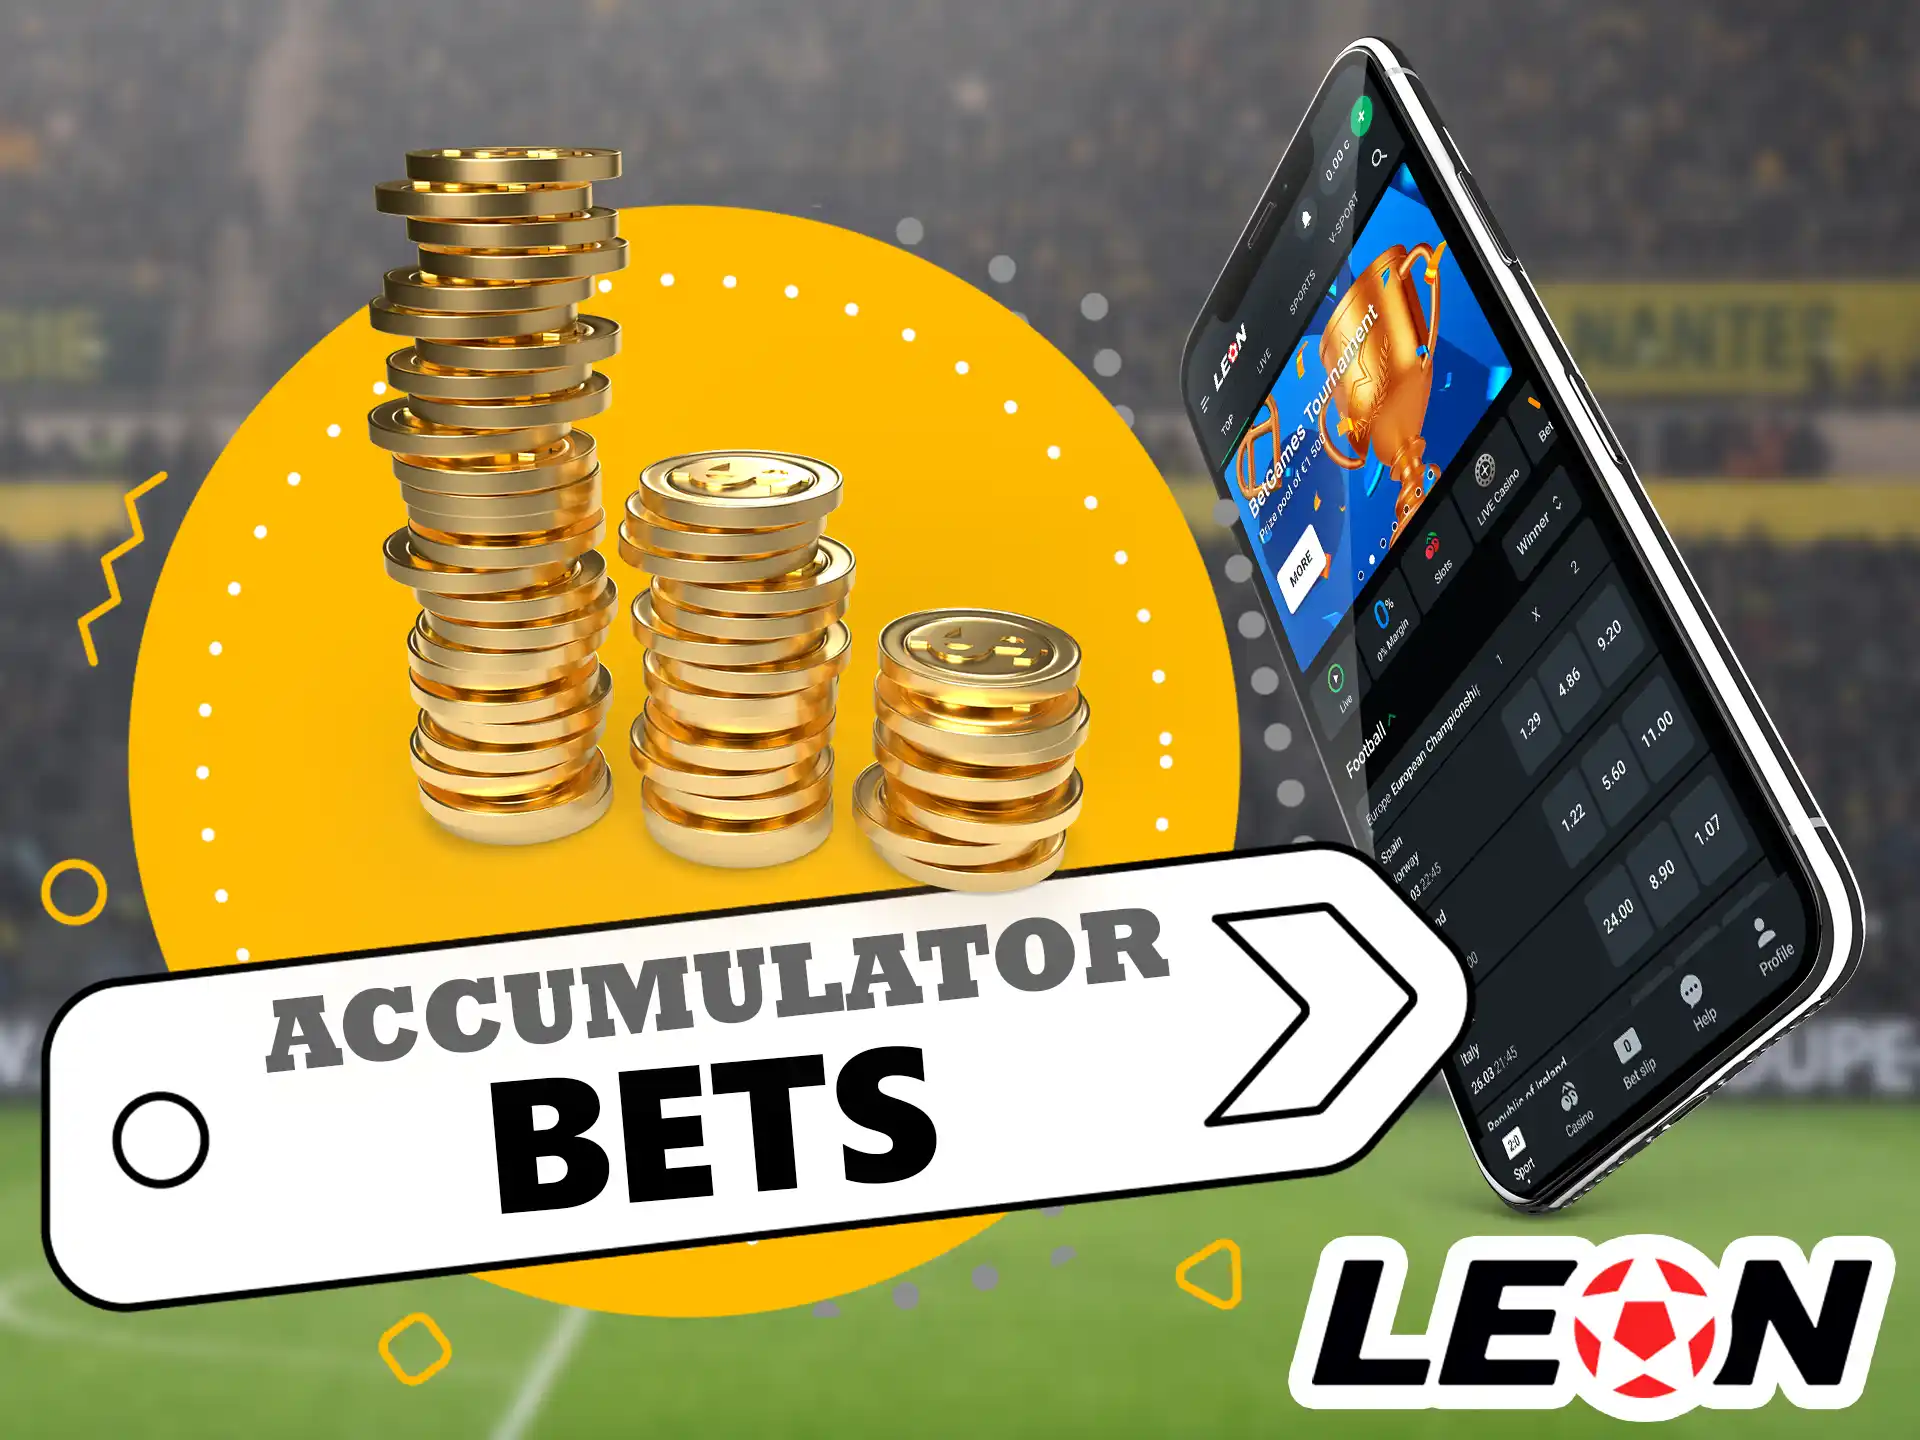 Here it is simple: a player in Leon Bet bets on several matches, the odds are summed up, if any of the outcomes will be a loser, then, unfortunately, the entire pool will lose.